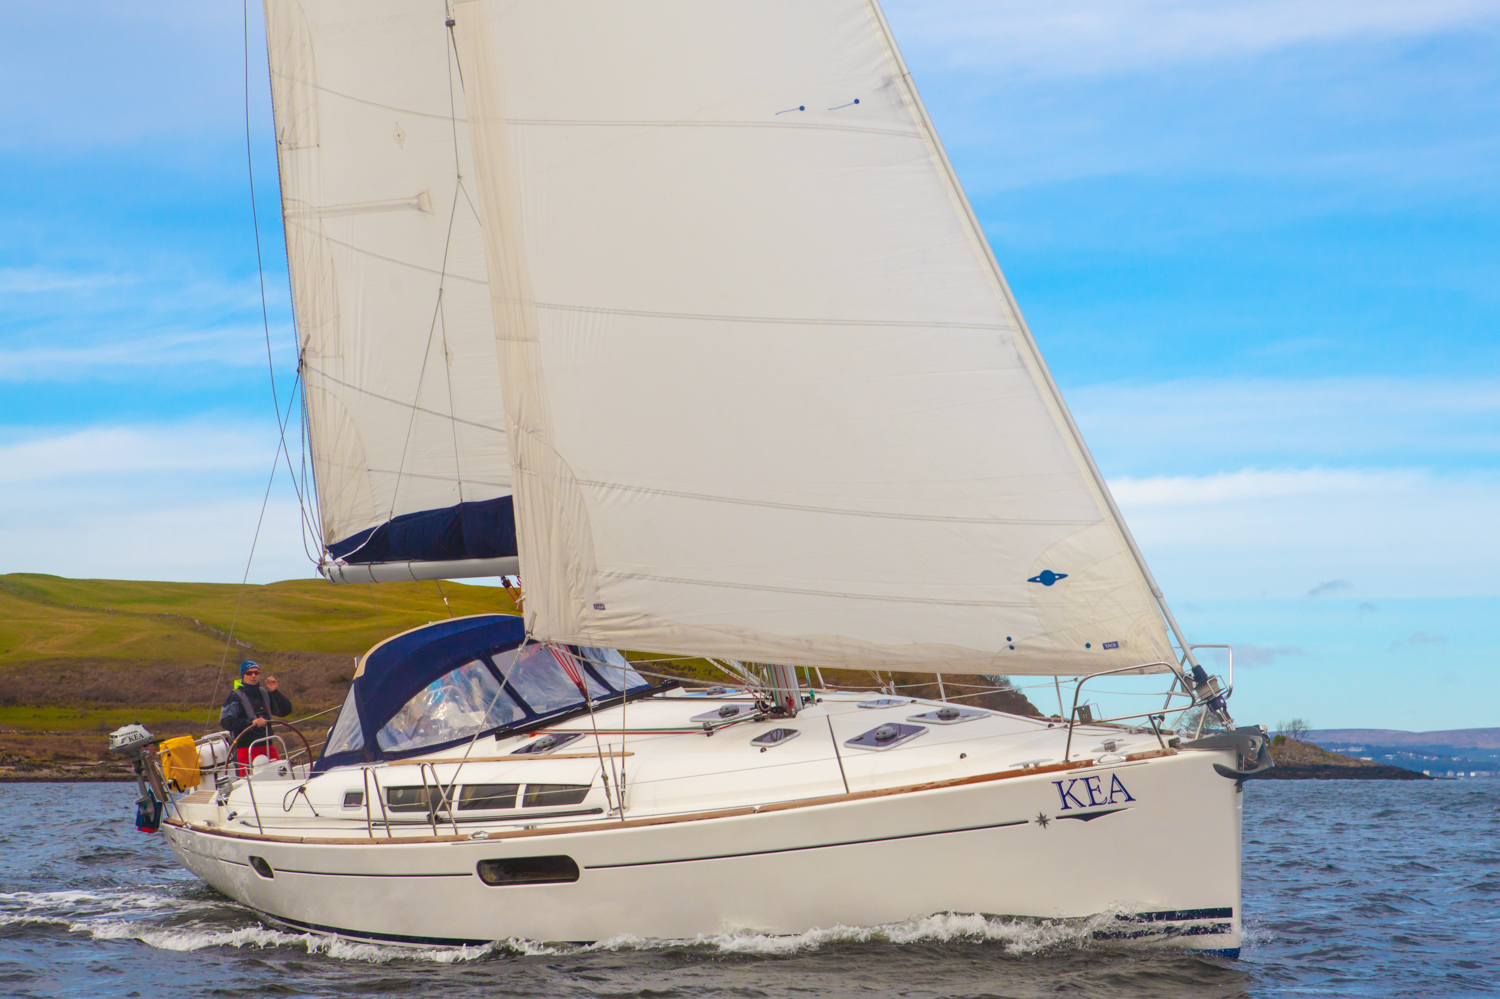 jeanneau sun odyssey 42i - Yacht Charter United Kingdom & Boat hire in United Kingdom Scotland Firth of Clyde Largs Largs Yacht Haven 3